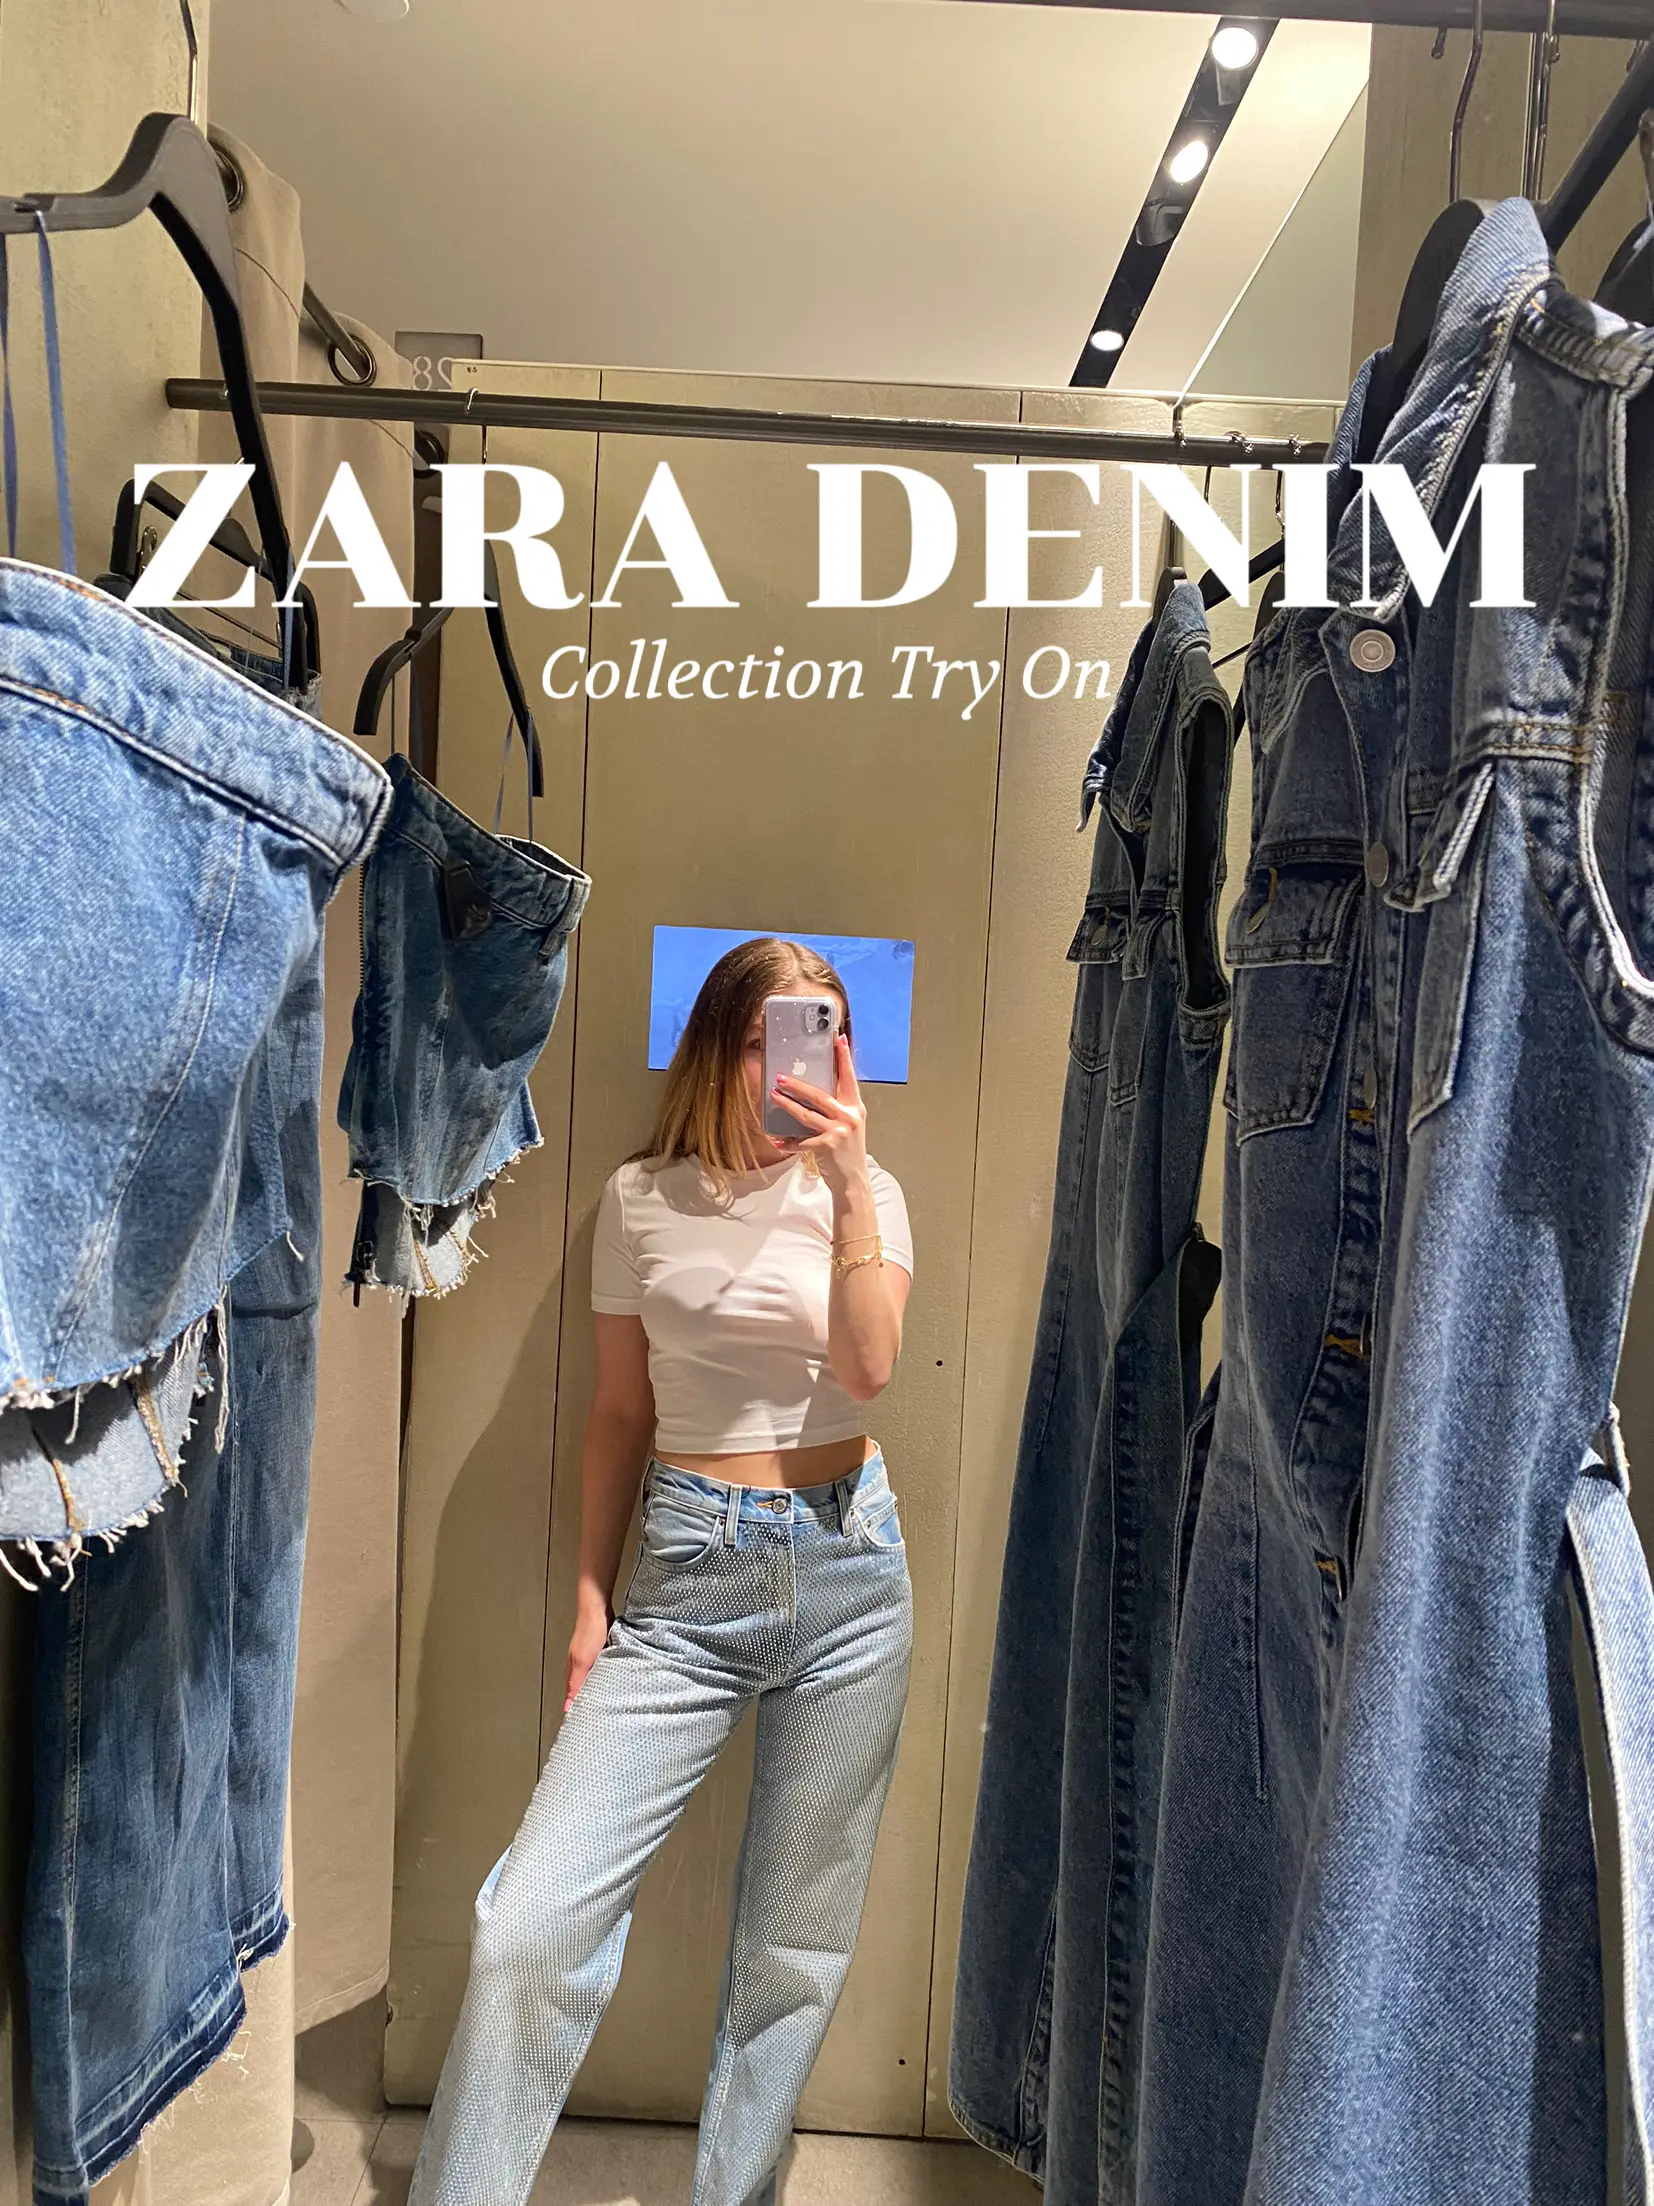 Zara's New Denim Collection, Gallery posted by Brooke in NY